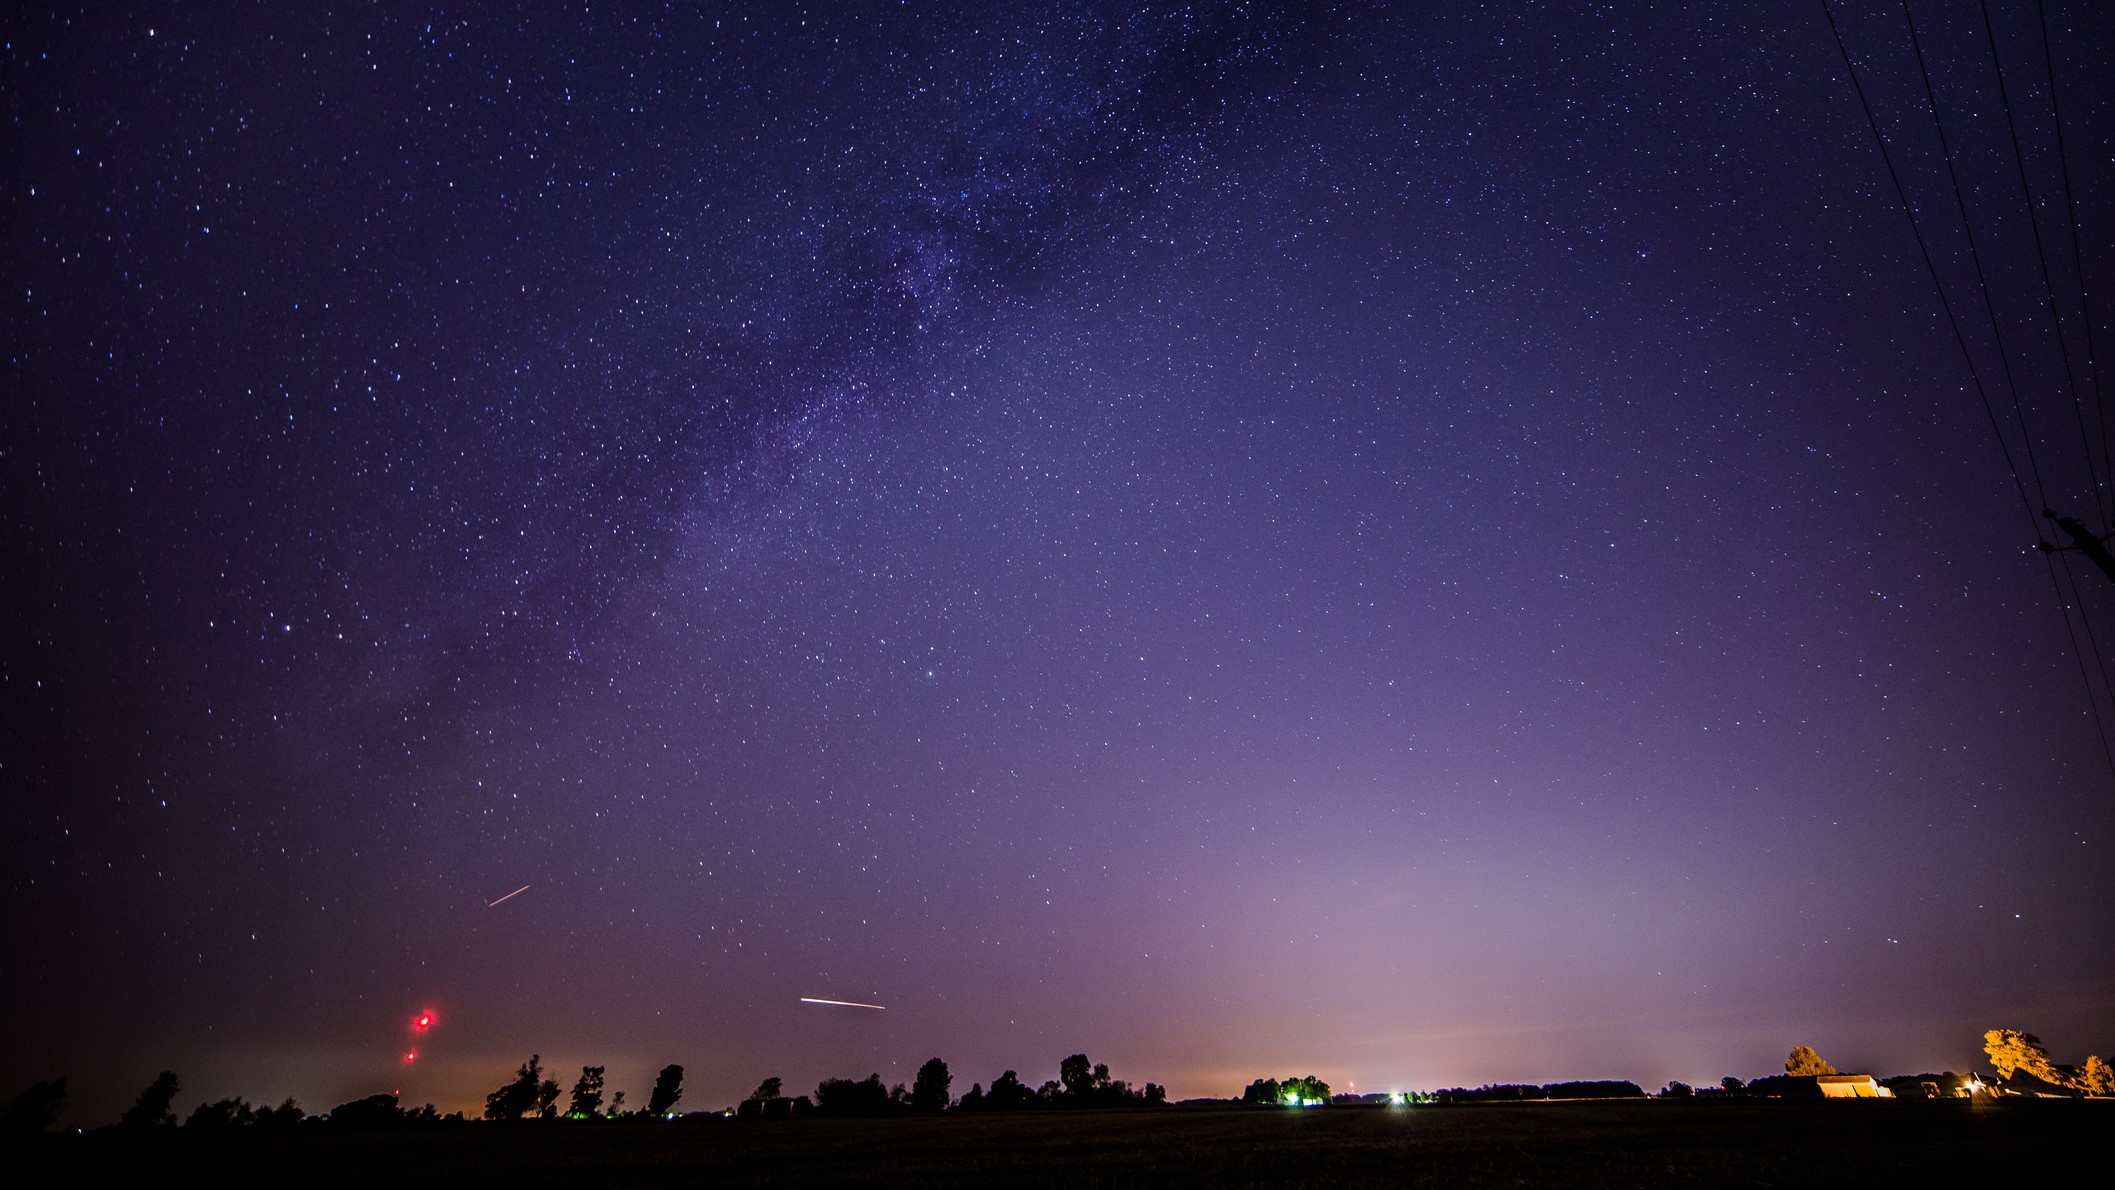 The Draconid meteor shower peaks this weekend. Here's how to see it